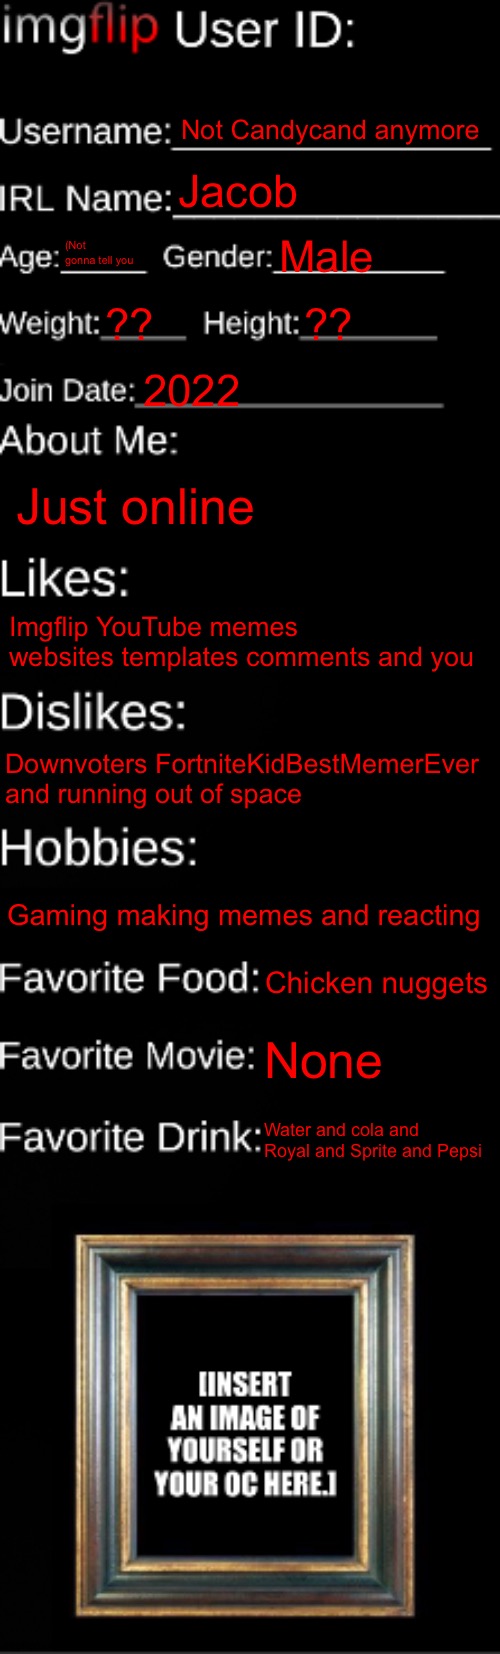 imgflip ID Card | Not Candycand anymore; Jacob; (Not gonna tell you; Male; ?? ?? 2022; Just online; Imgflip YouTube memes websites templates comments and you; Downvoters FortniteKidBestMemerEver and running out of space; Gaming making memes and reacting; Chicken nuggets; None; Water and cola and Royal and Sprite and Pepsi | image tagged in imgflip id card | made w/ Imgflip meme maker